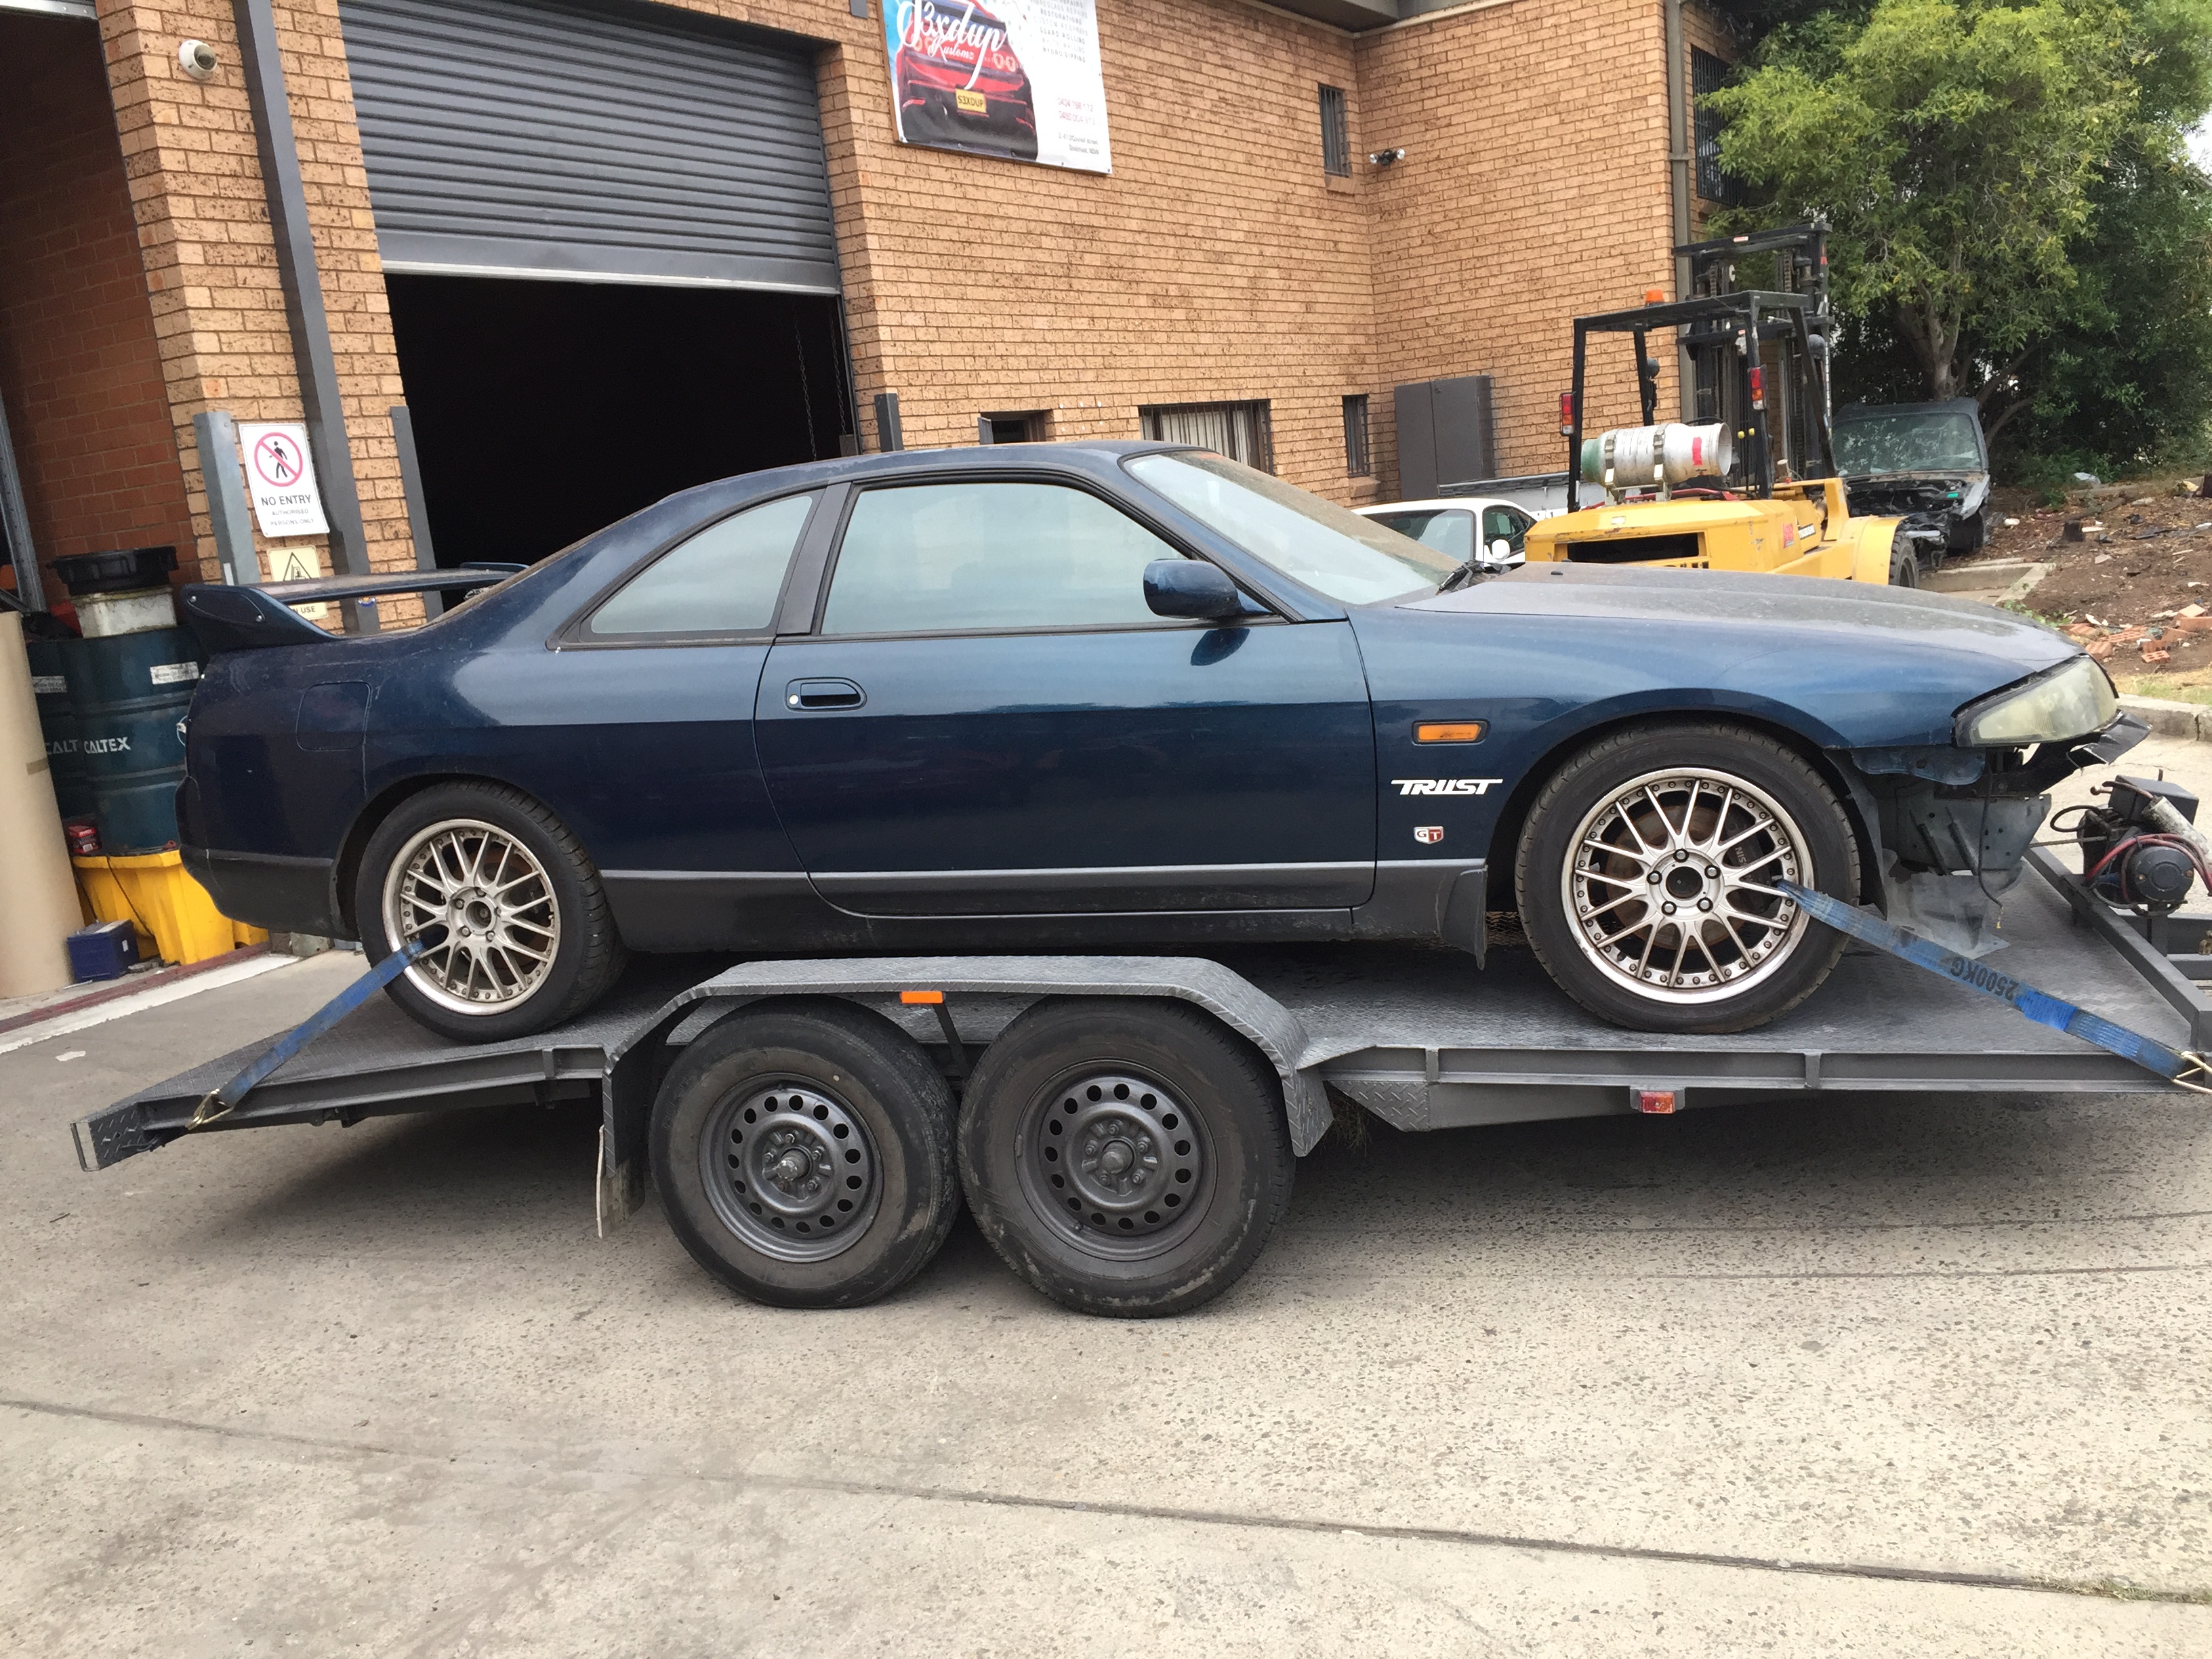 Now Wrecking Nissan Skyline R33 Gtst 1994 Turbo Manual Sunroof Abs Model Series Blown Motor Will Sell Shell At Right Price Jap Sports Spares